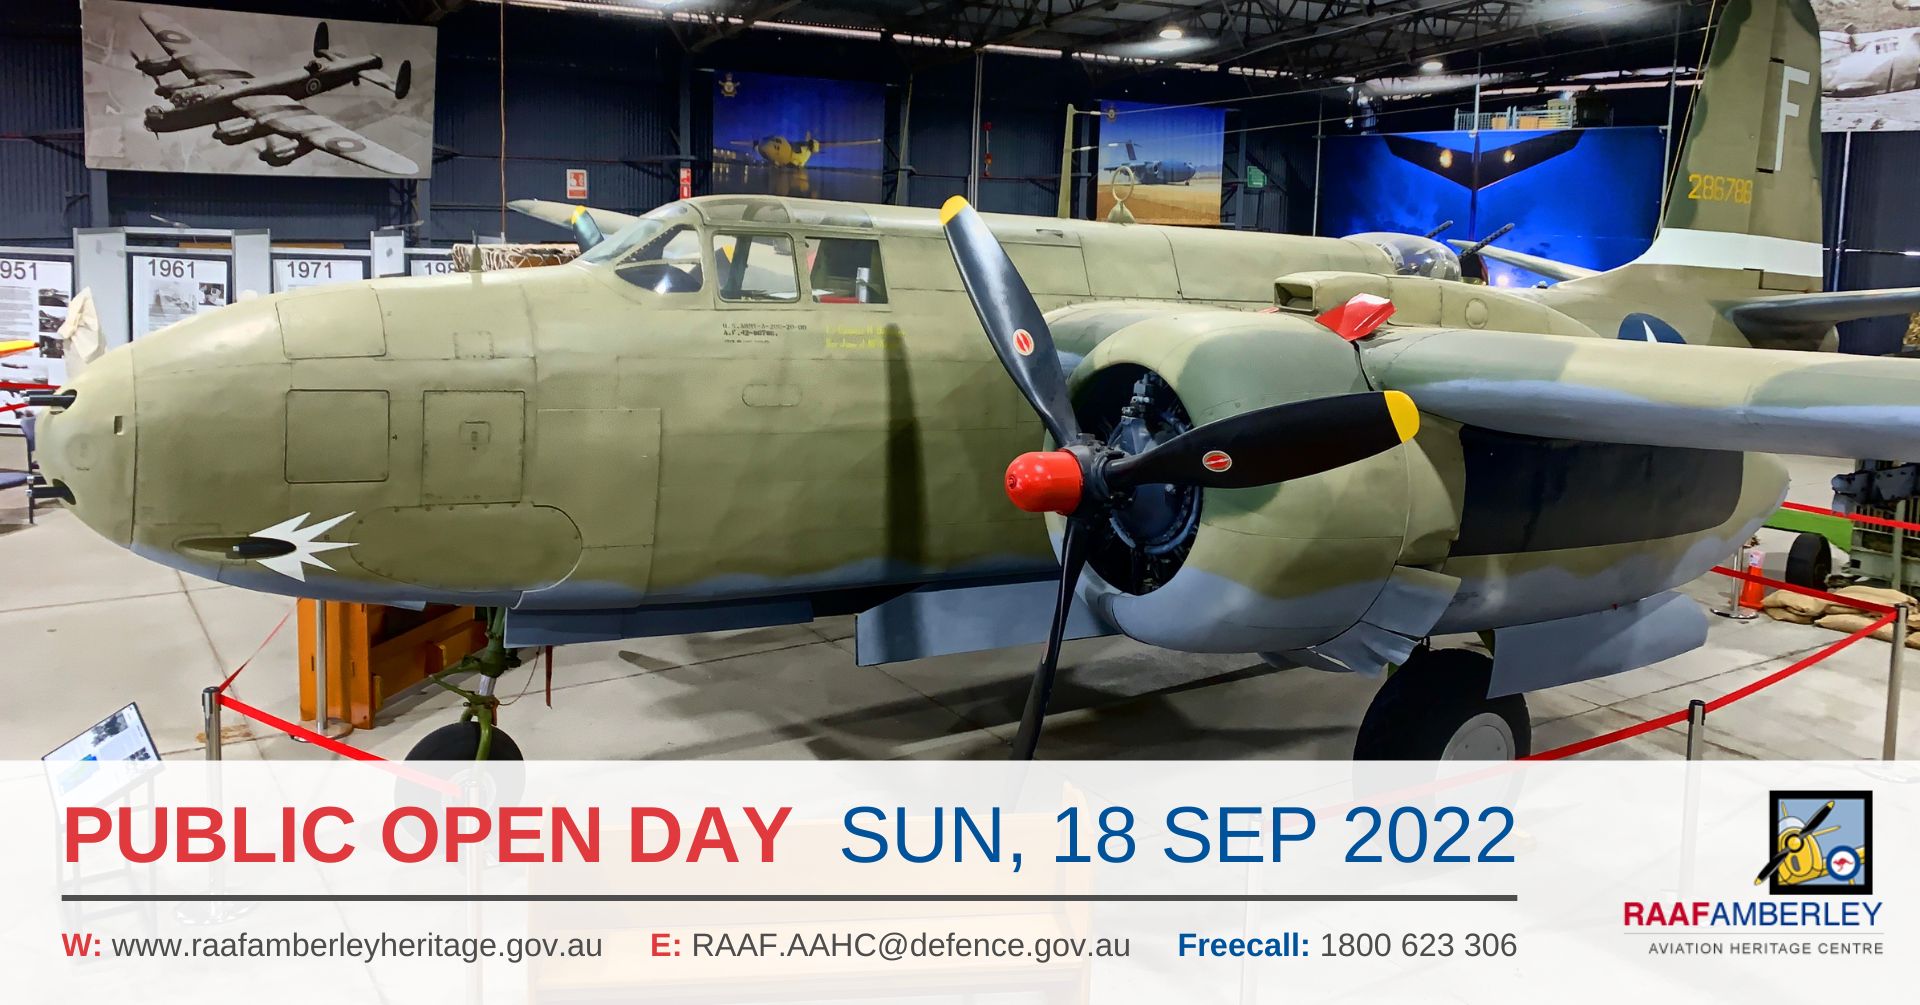 RAAF AAHC - Monthly Sunday Public Open Day - 18 Sep 22